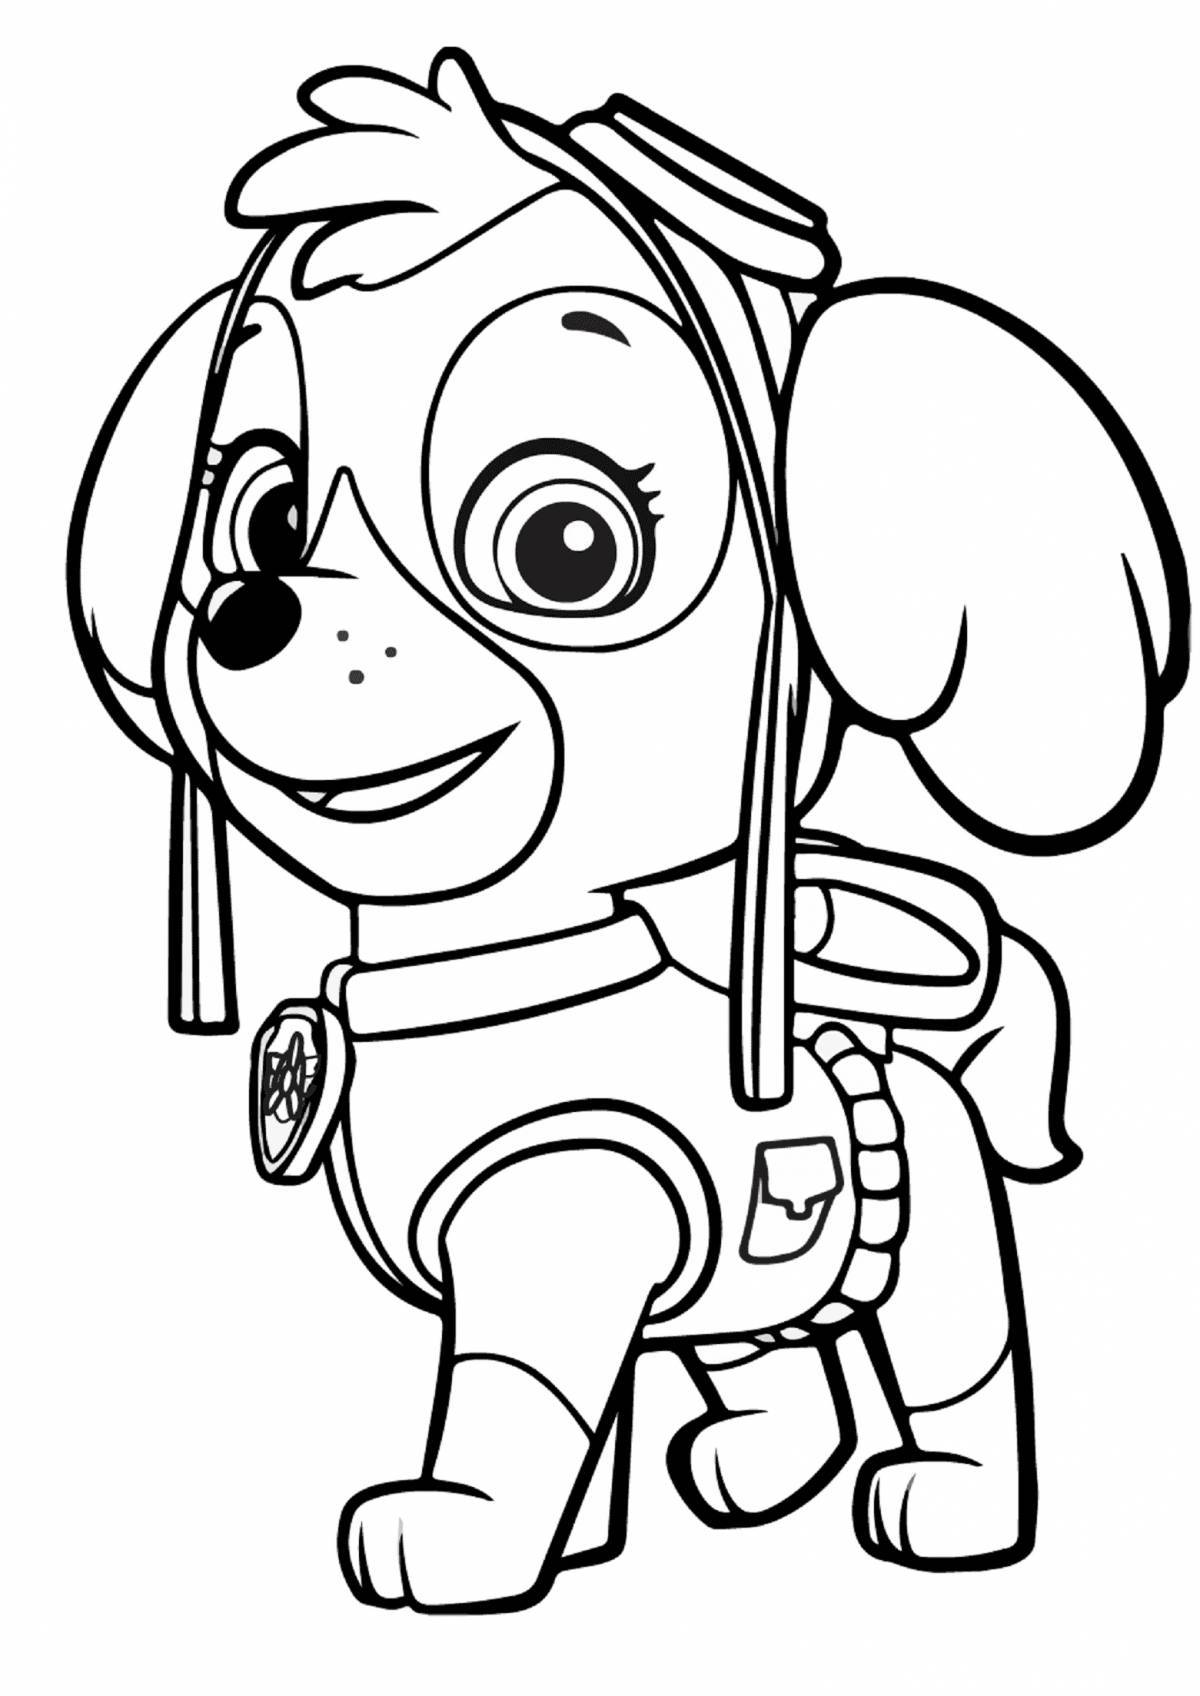 Beautiful Paw Patrol Coloring Page for Toddlers